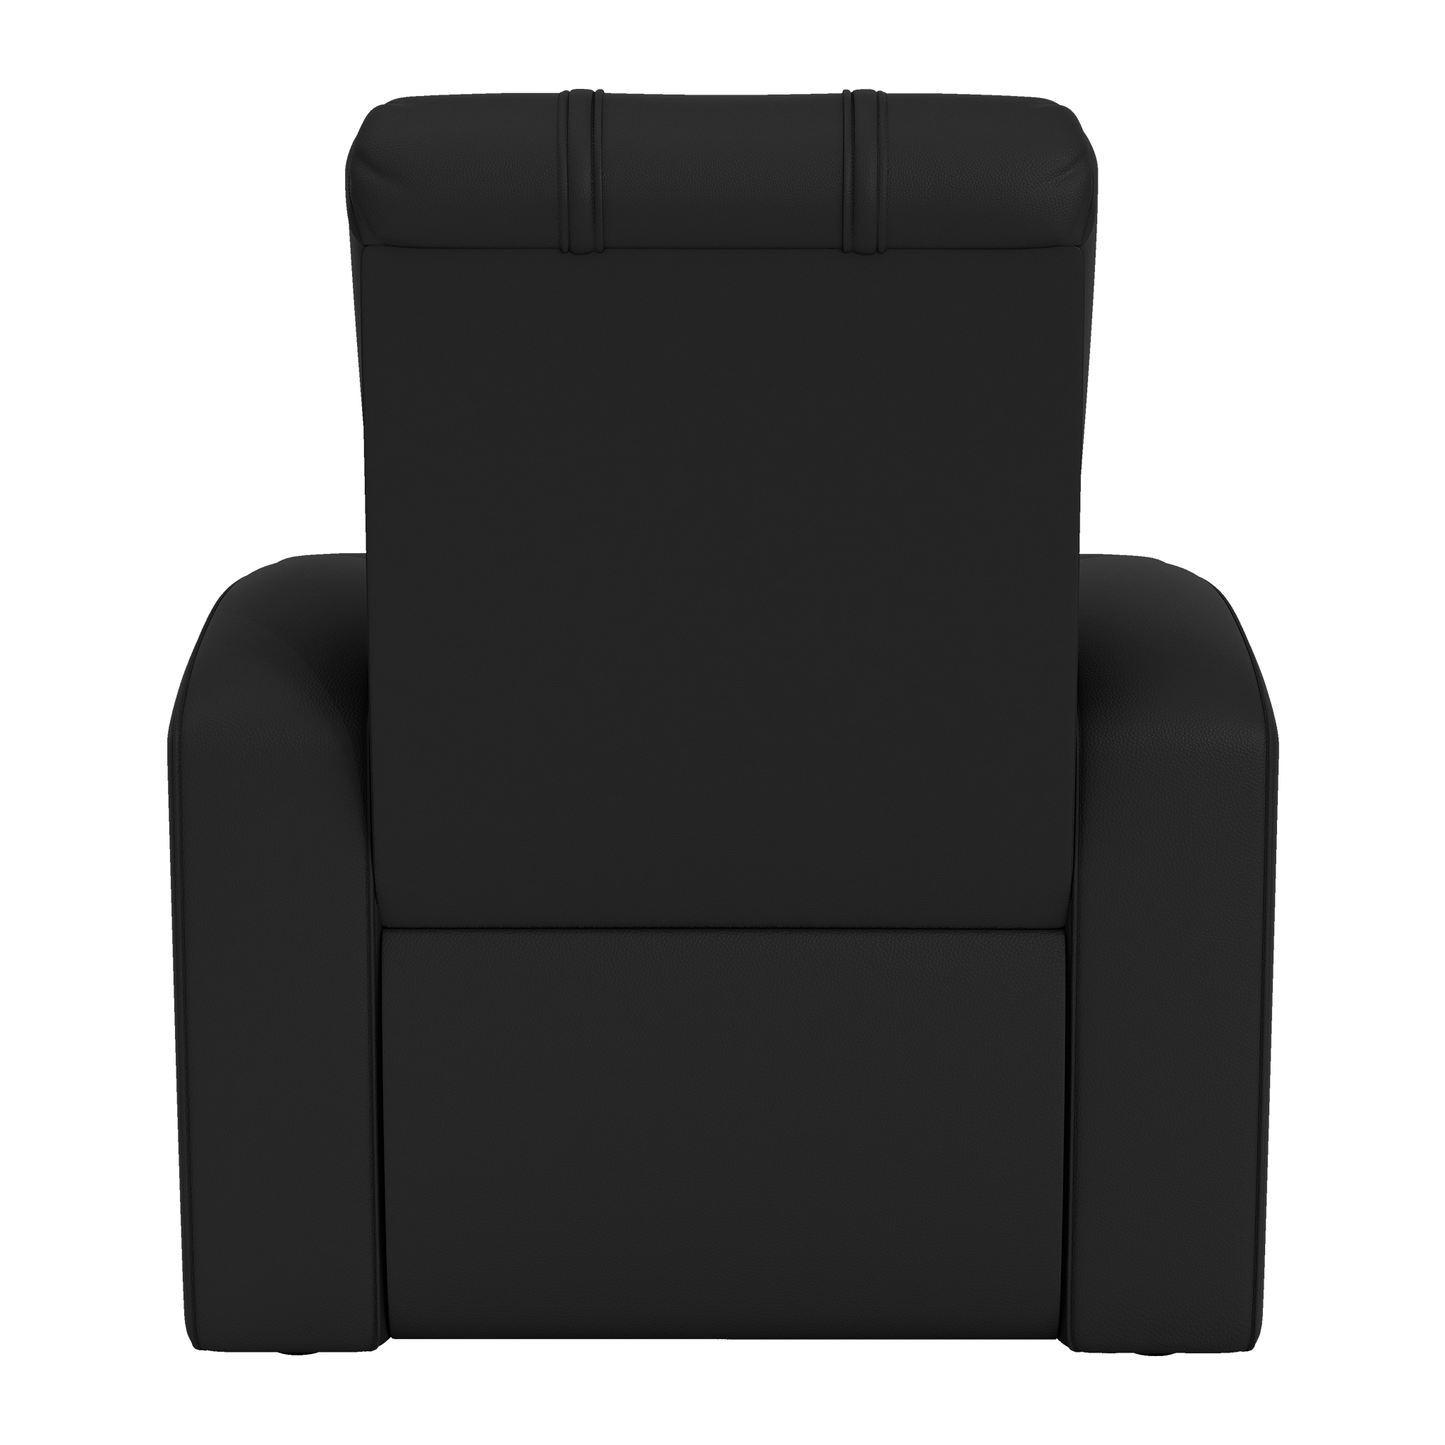 Relax Home Theater Recliner with Glytch Secondary Logo